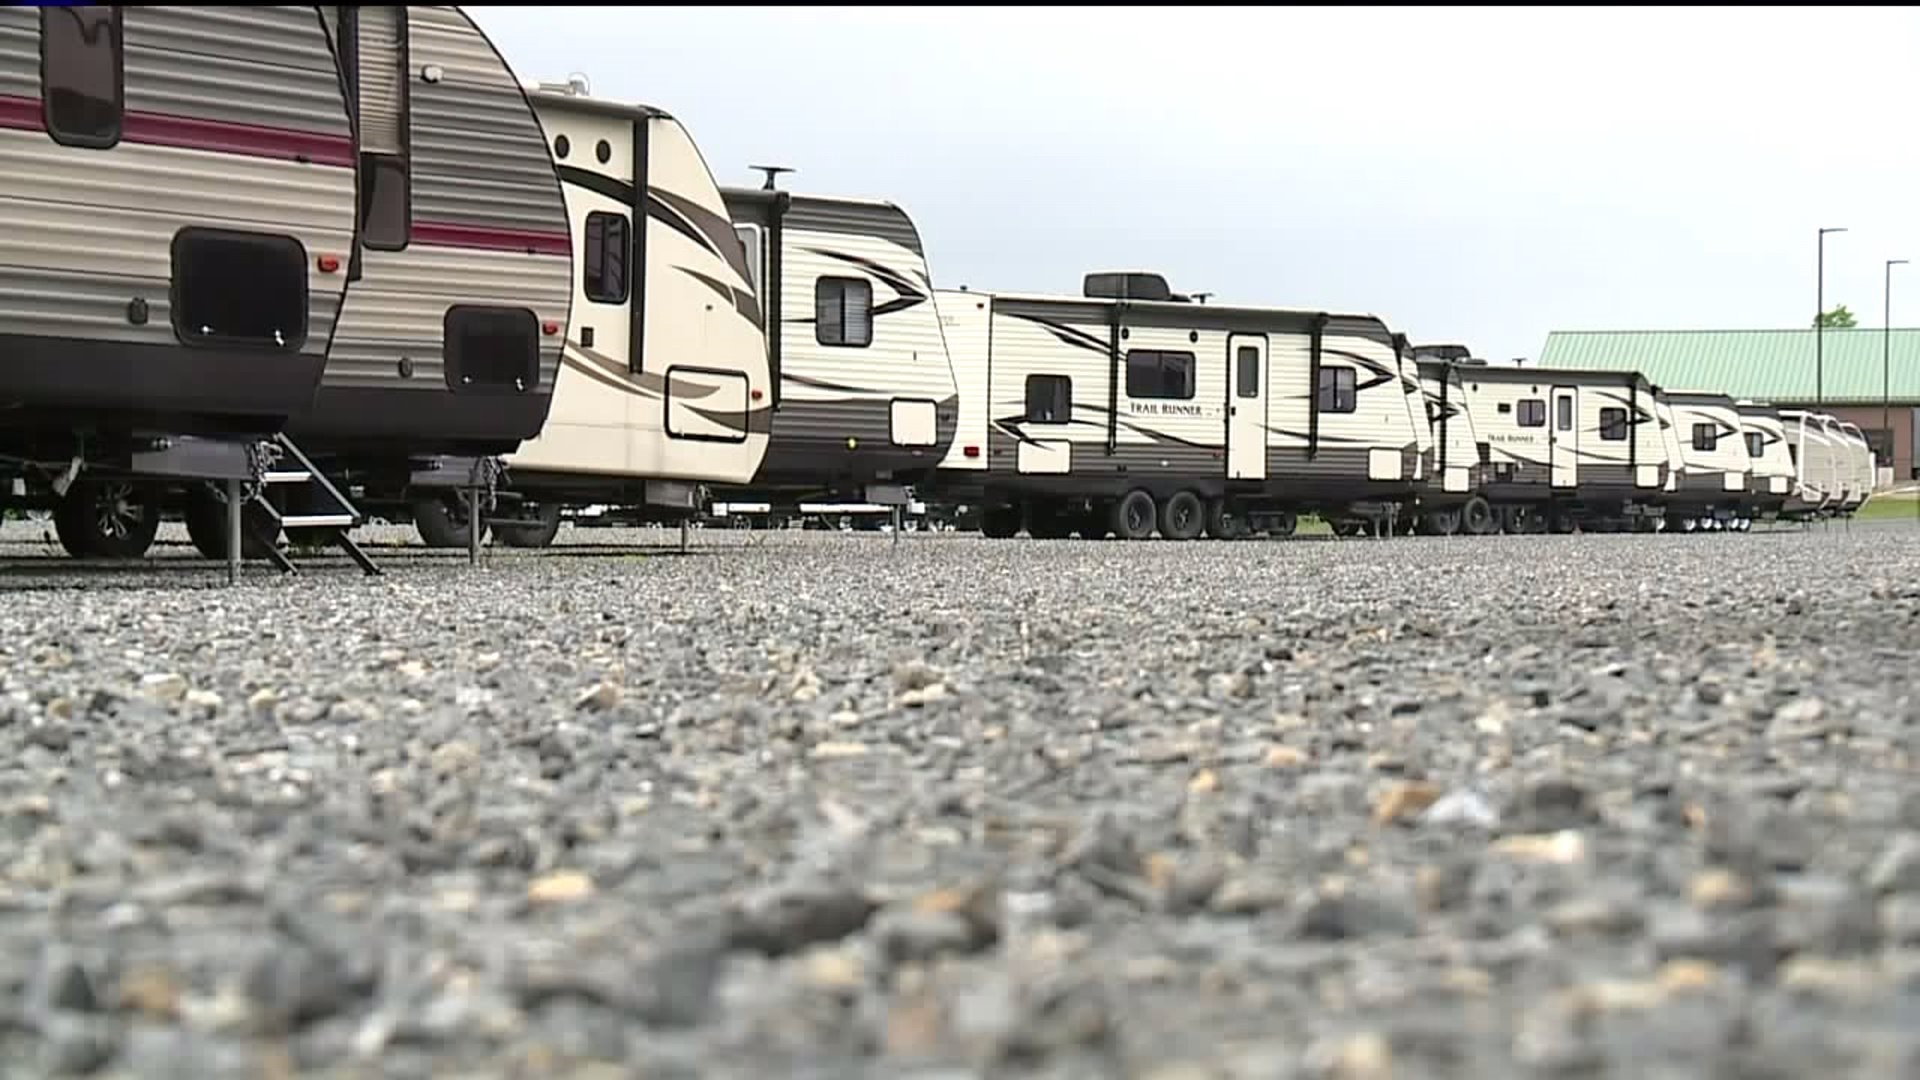 Despite High Gas Prices, RV Owners are Hitting the Road